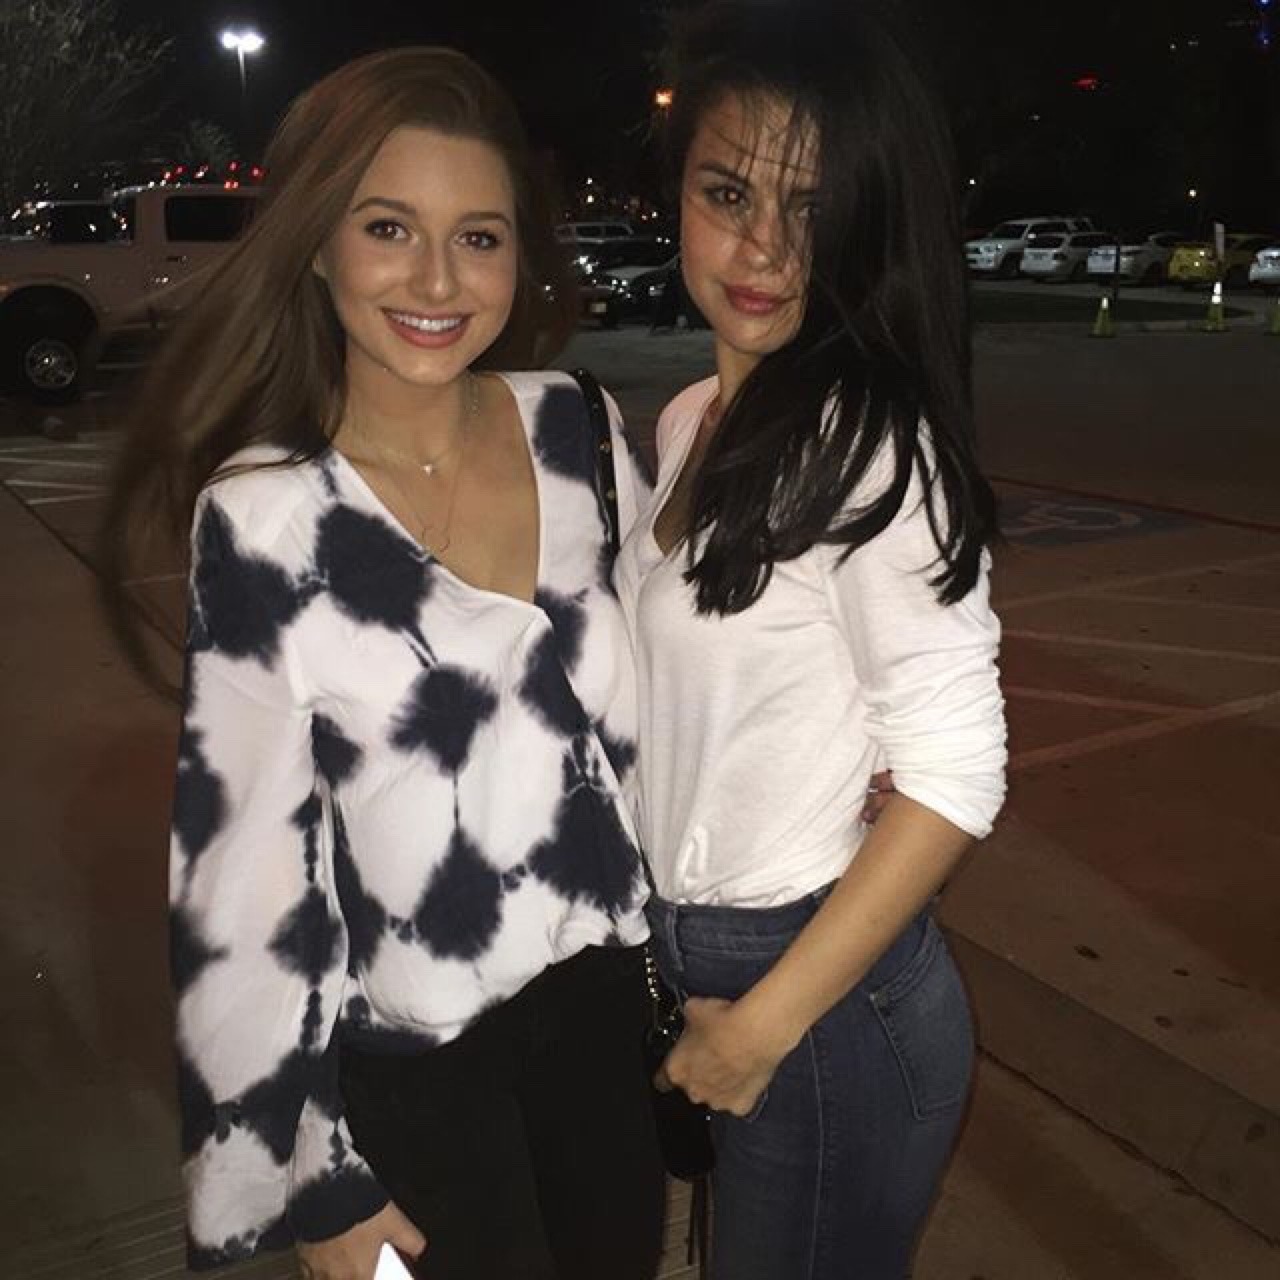 @natalie_serio: night out with my girl @selenagomez